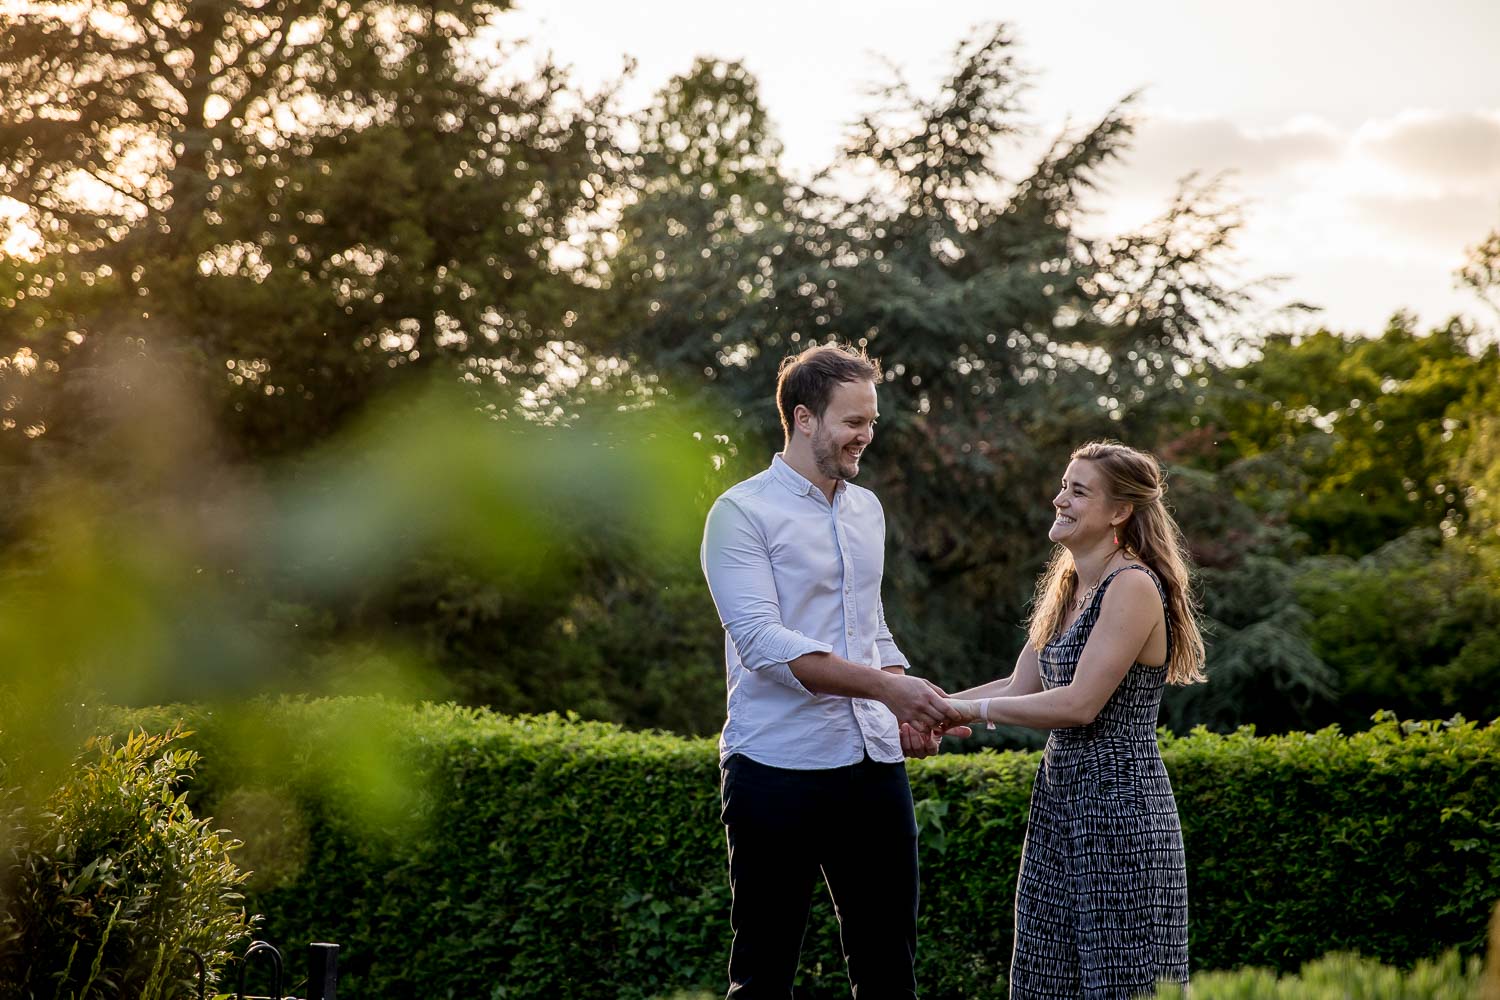 Peckham Rye Engagement Photography South London - Penny and Jere